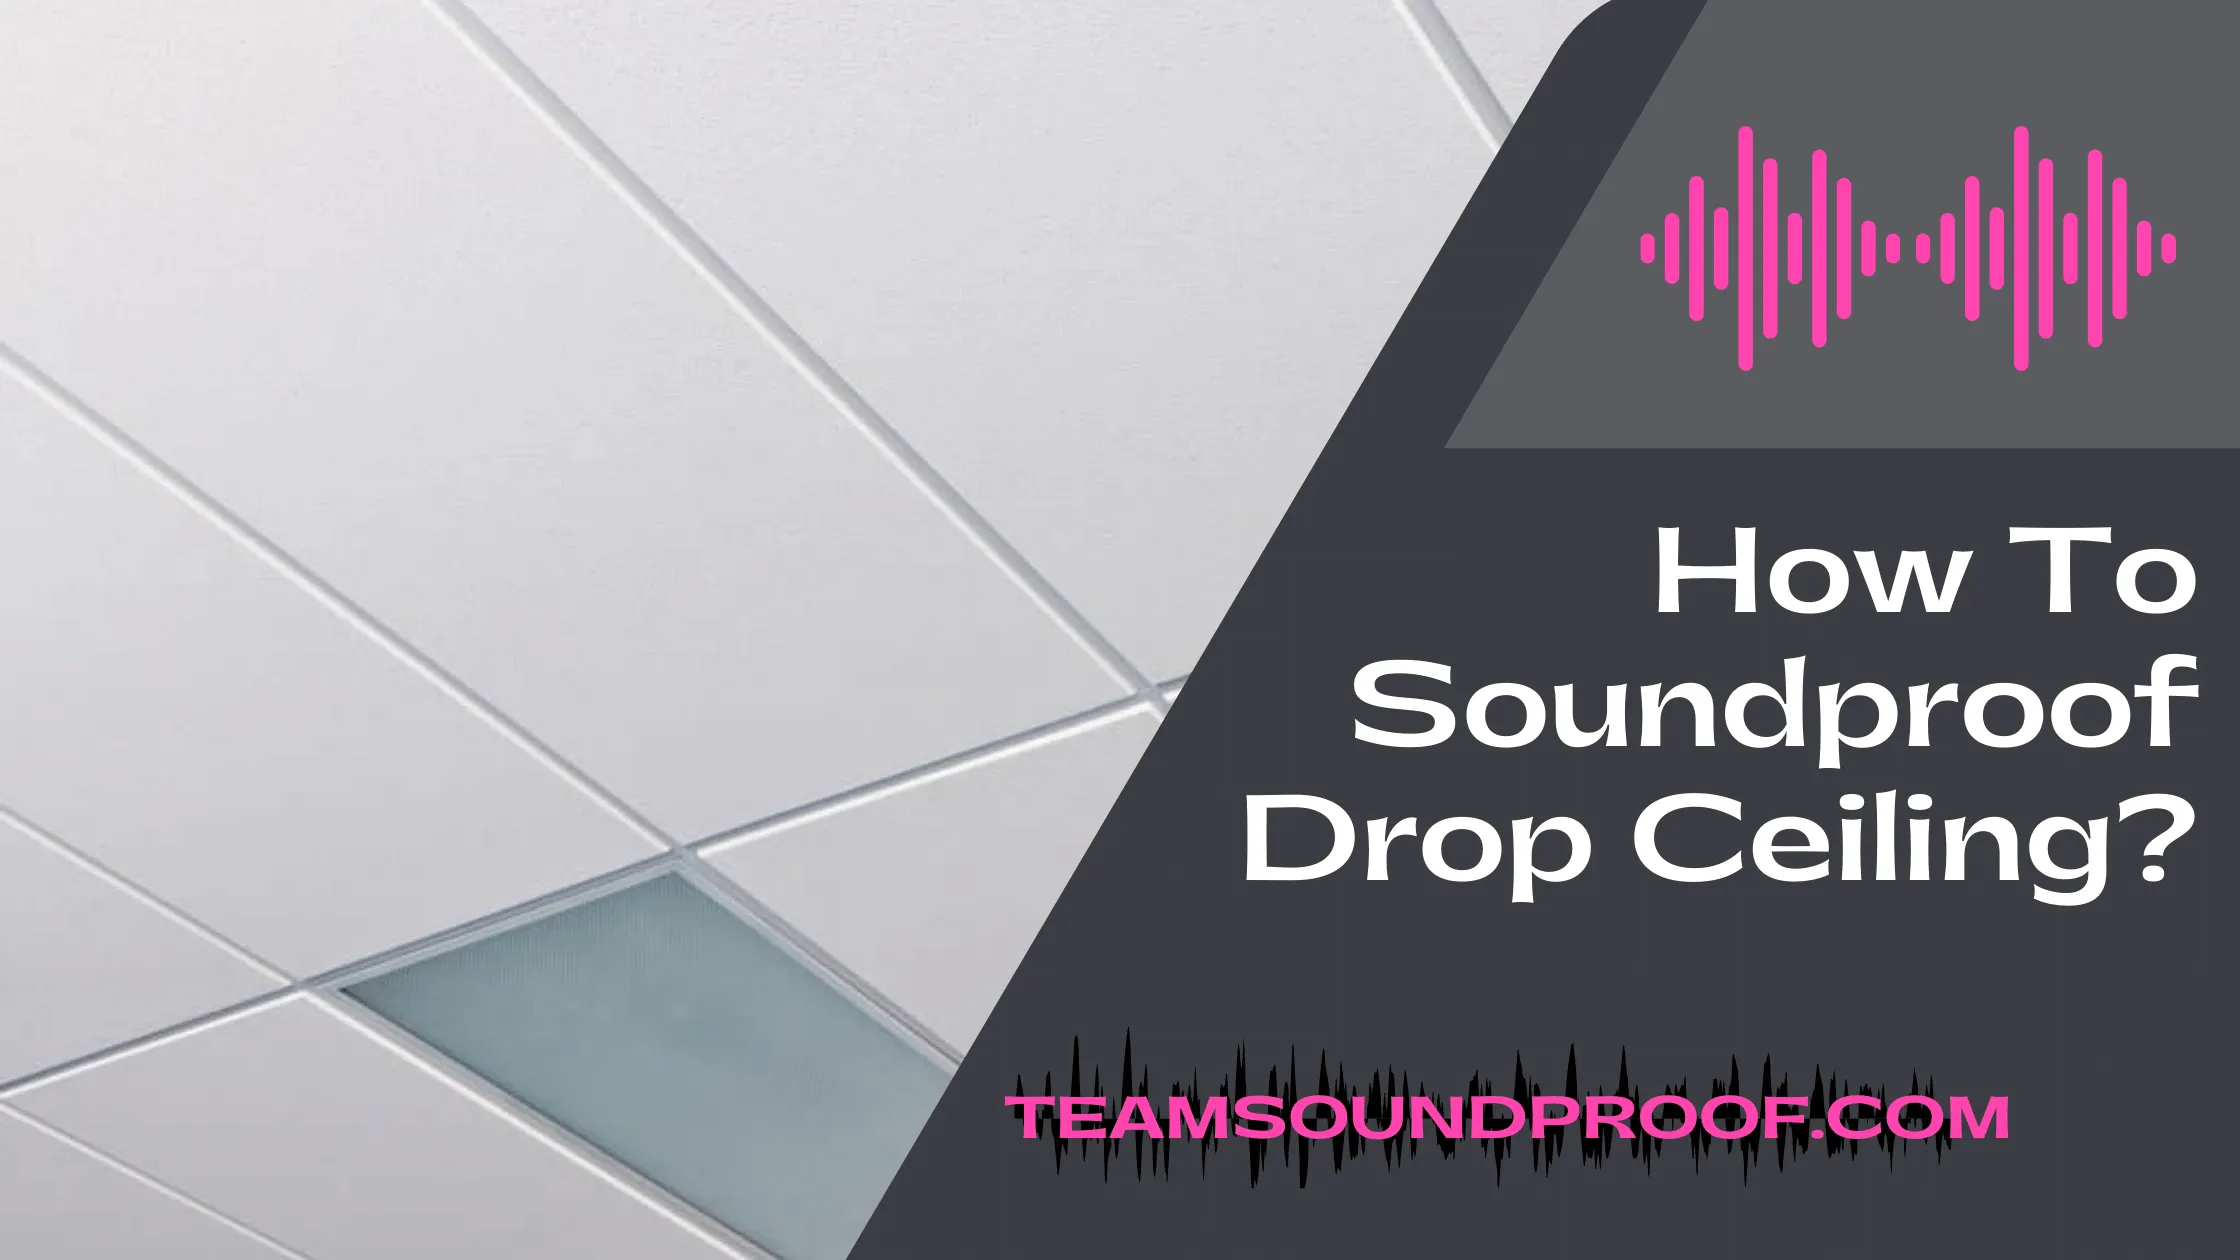 How To Soundproof Drop Ceiling? - Complete Guide